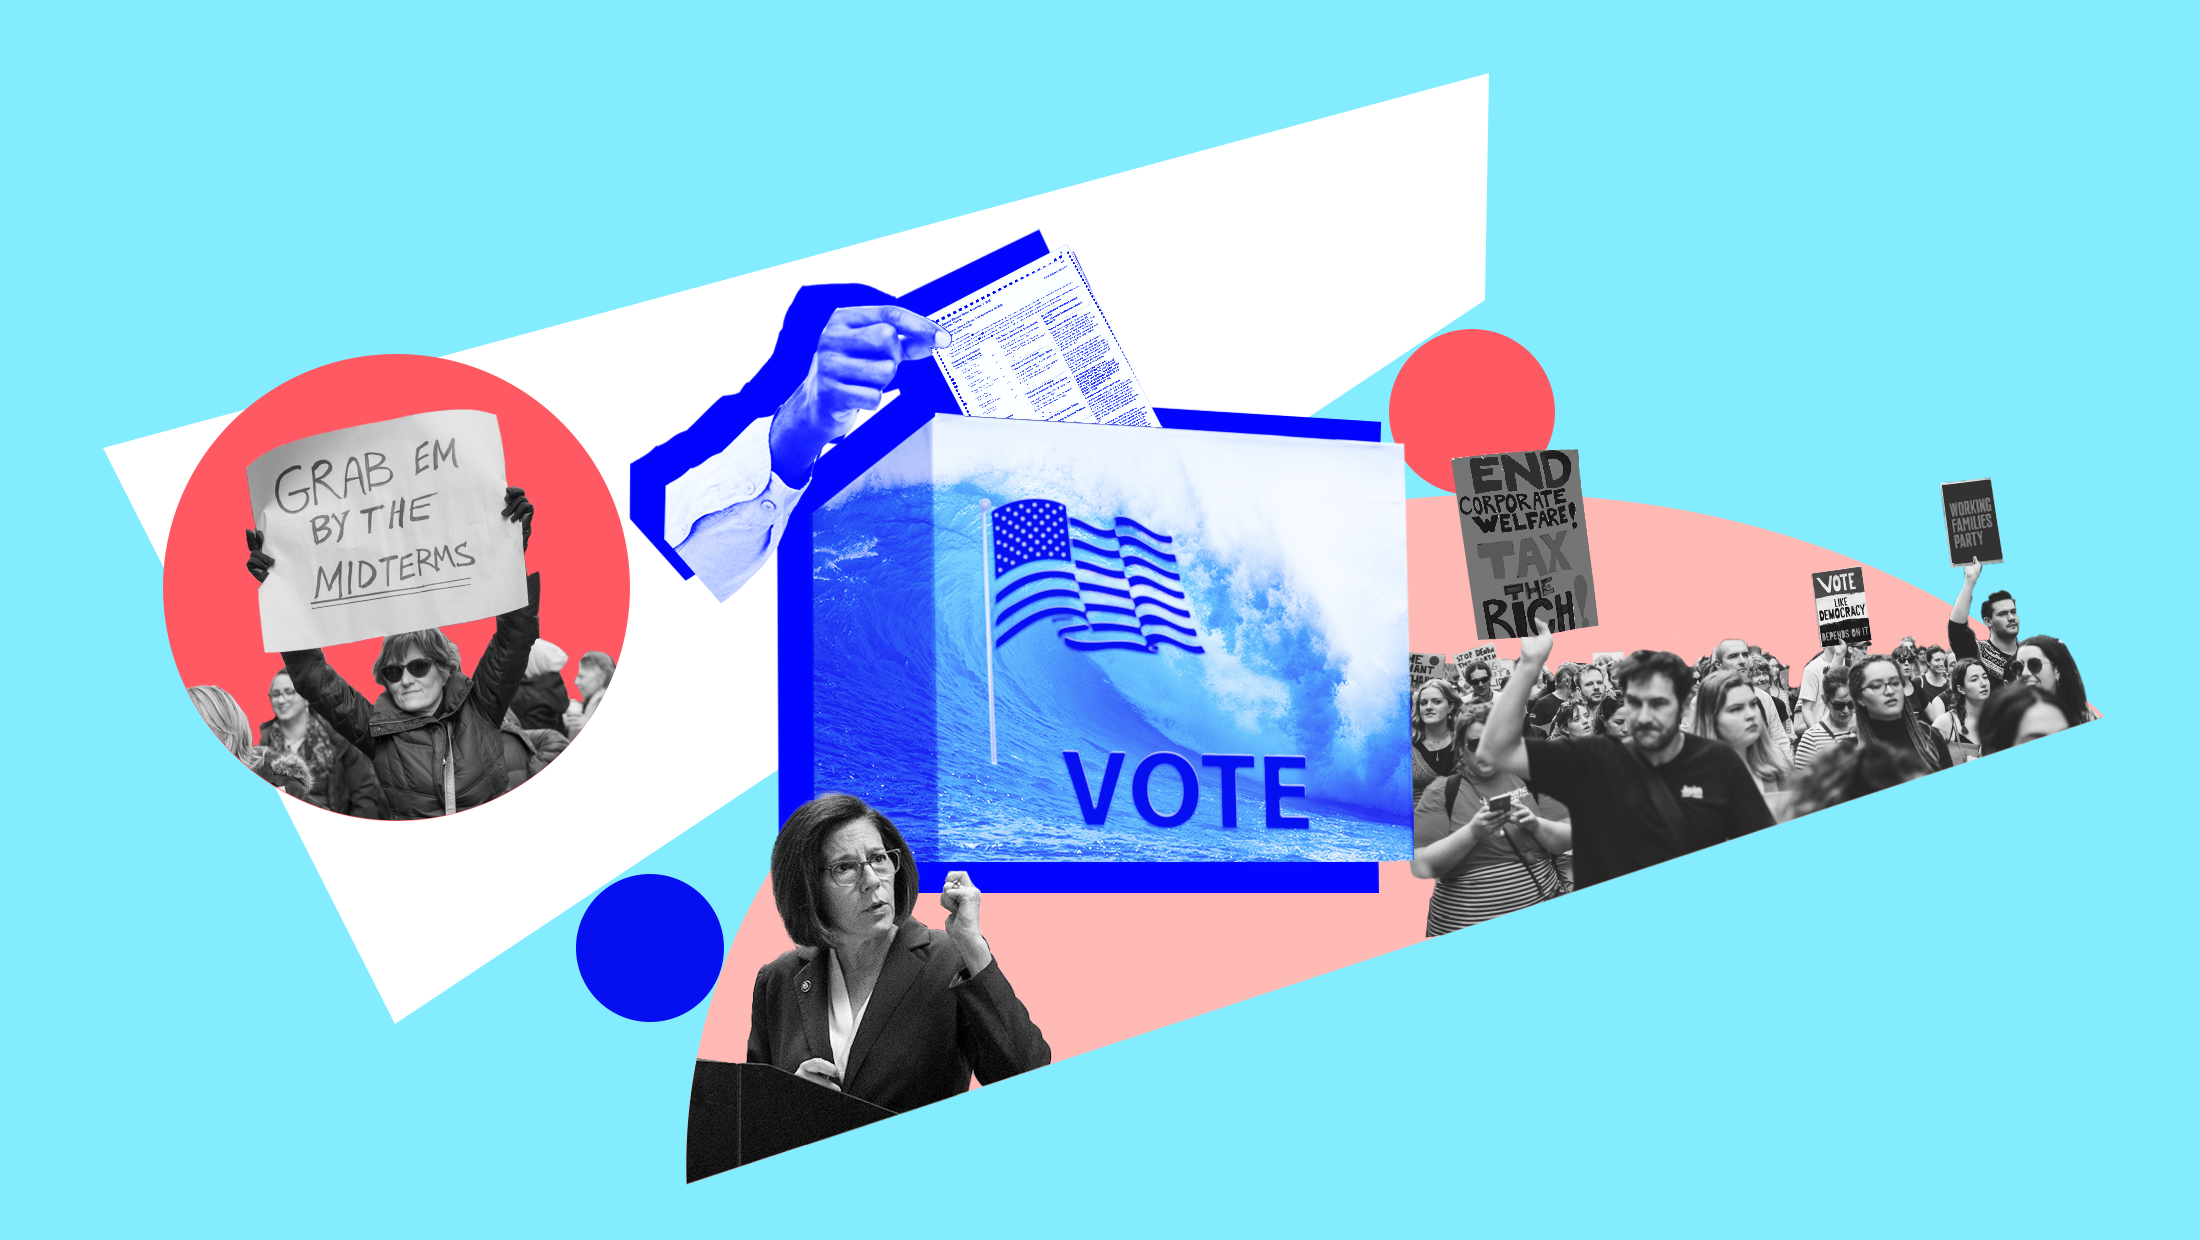 Light blue background with image of blue wave, an American flag and the word "VOTE" laid over a ballot box and someone inserting their ballot into the box, a black and white image of someone holding up a sign that reads "GRAB EM BY THE MIDTERMS," a black and white image of Sen. Catherine Cortez Masto and a black and white image of people protesting and holding up a sign that reads "END CORPORATE WELFARE TAX THE RICH" and another sign that reads "VOTE LIKE DEMOCRACY DEPENDS ON IT" and another sign that reads "WORKING FAMILIES PARTY"